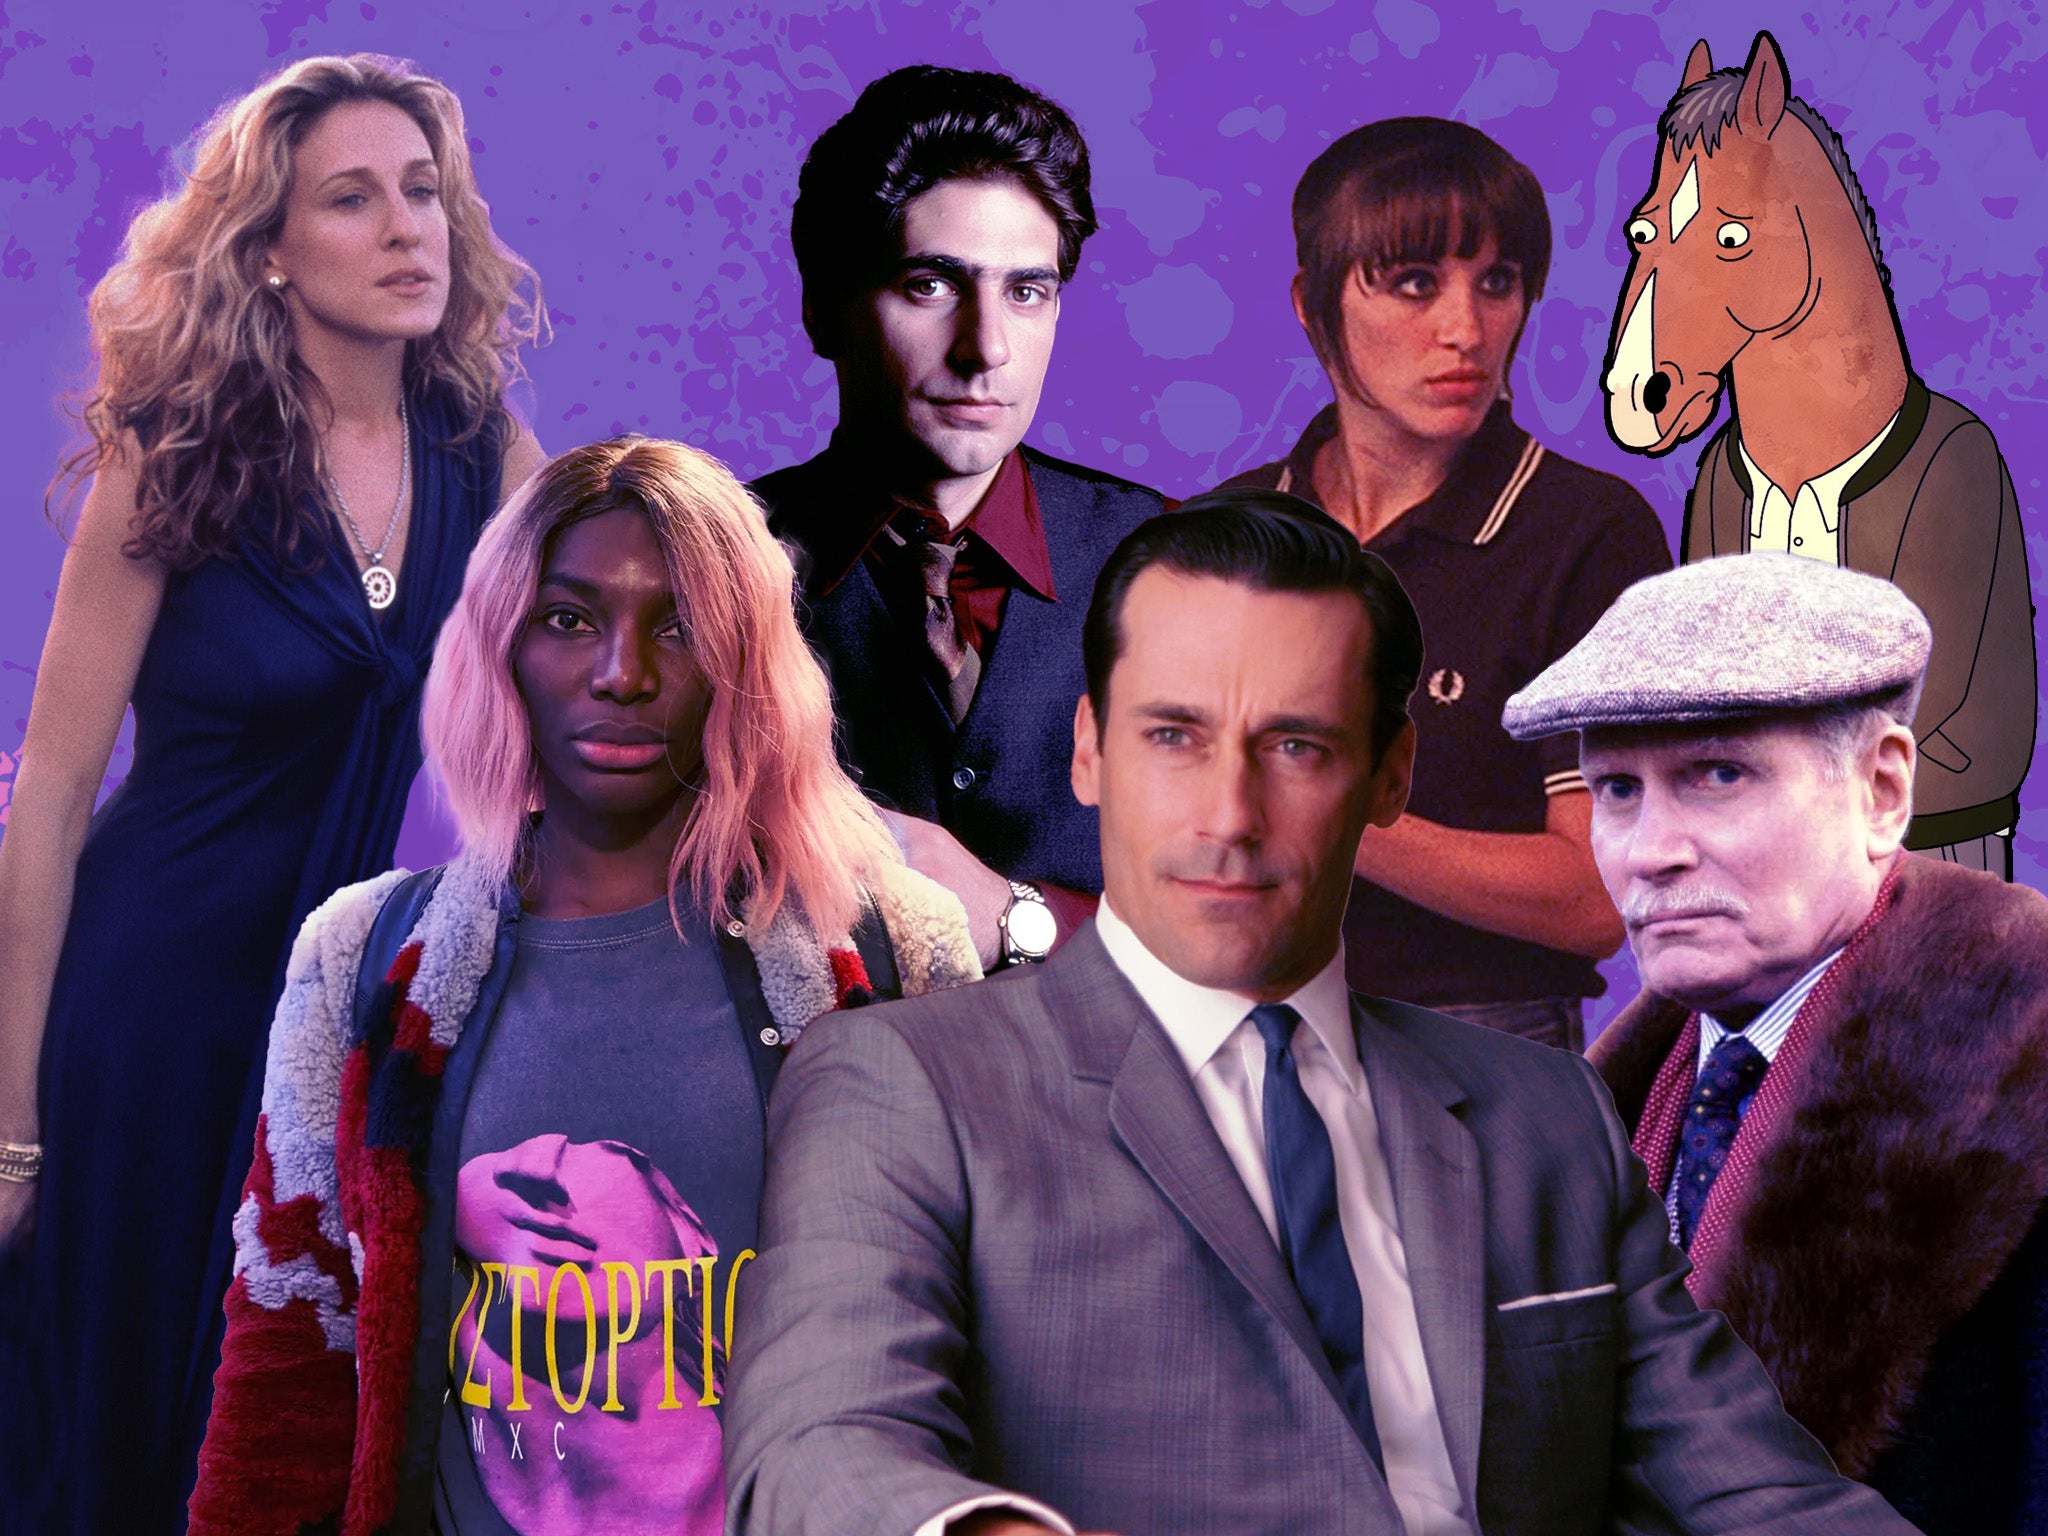 Sarah Jessica Parker in ‘Sex and the City’ and Jon Hamm in ‘Mad Men’ are just some of the actors who’ve starred in TV’s most wonderful episodes